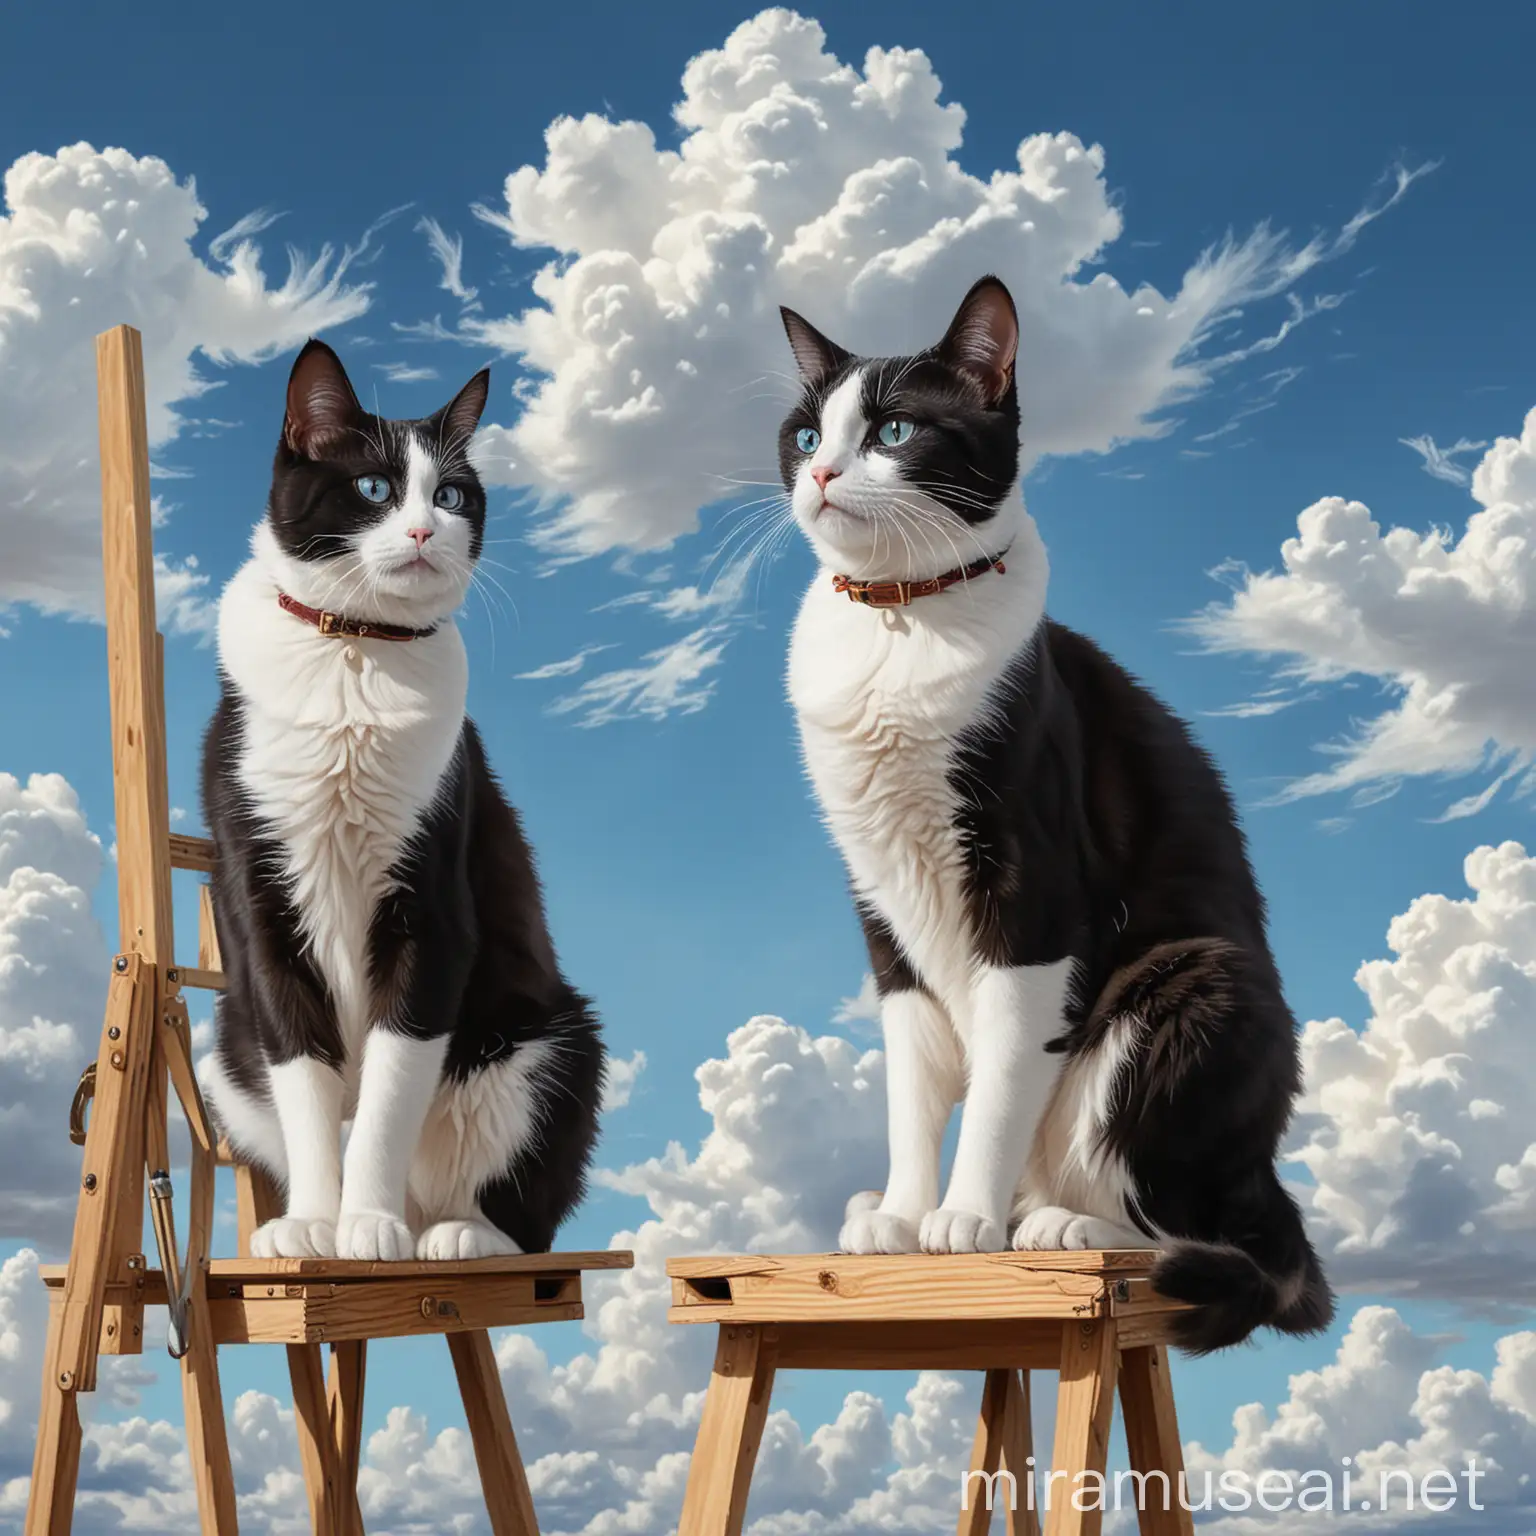 A drawed painting of two tuxedo cats drawing on easels. siting sitting somewhere high up. The background is a blue sky, with five clouds. The cat on the left has no canva on her easel thats why she has a shocked expression. The cat on the right has her canva and is relaxed and painting on it.